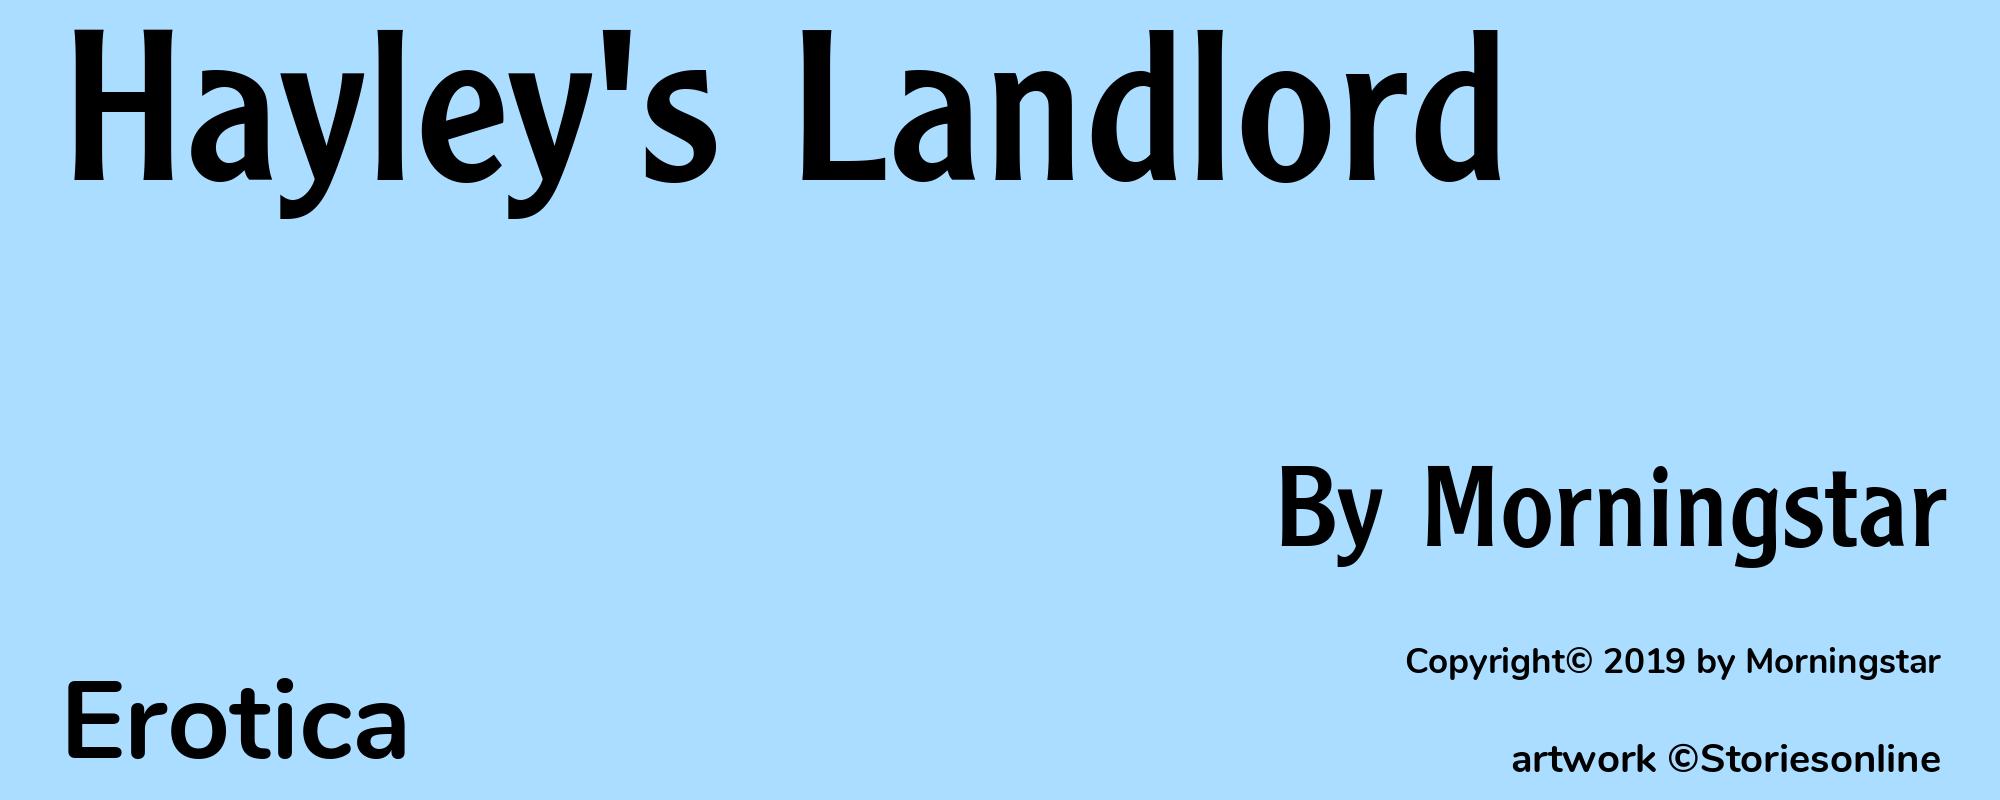 Hayley's Landlord - Cover